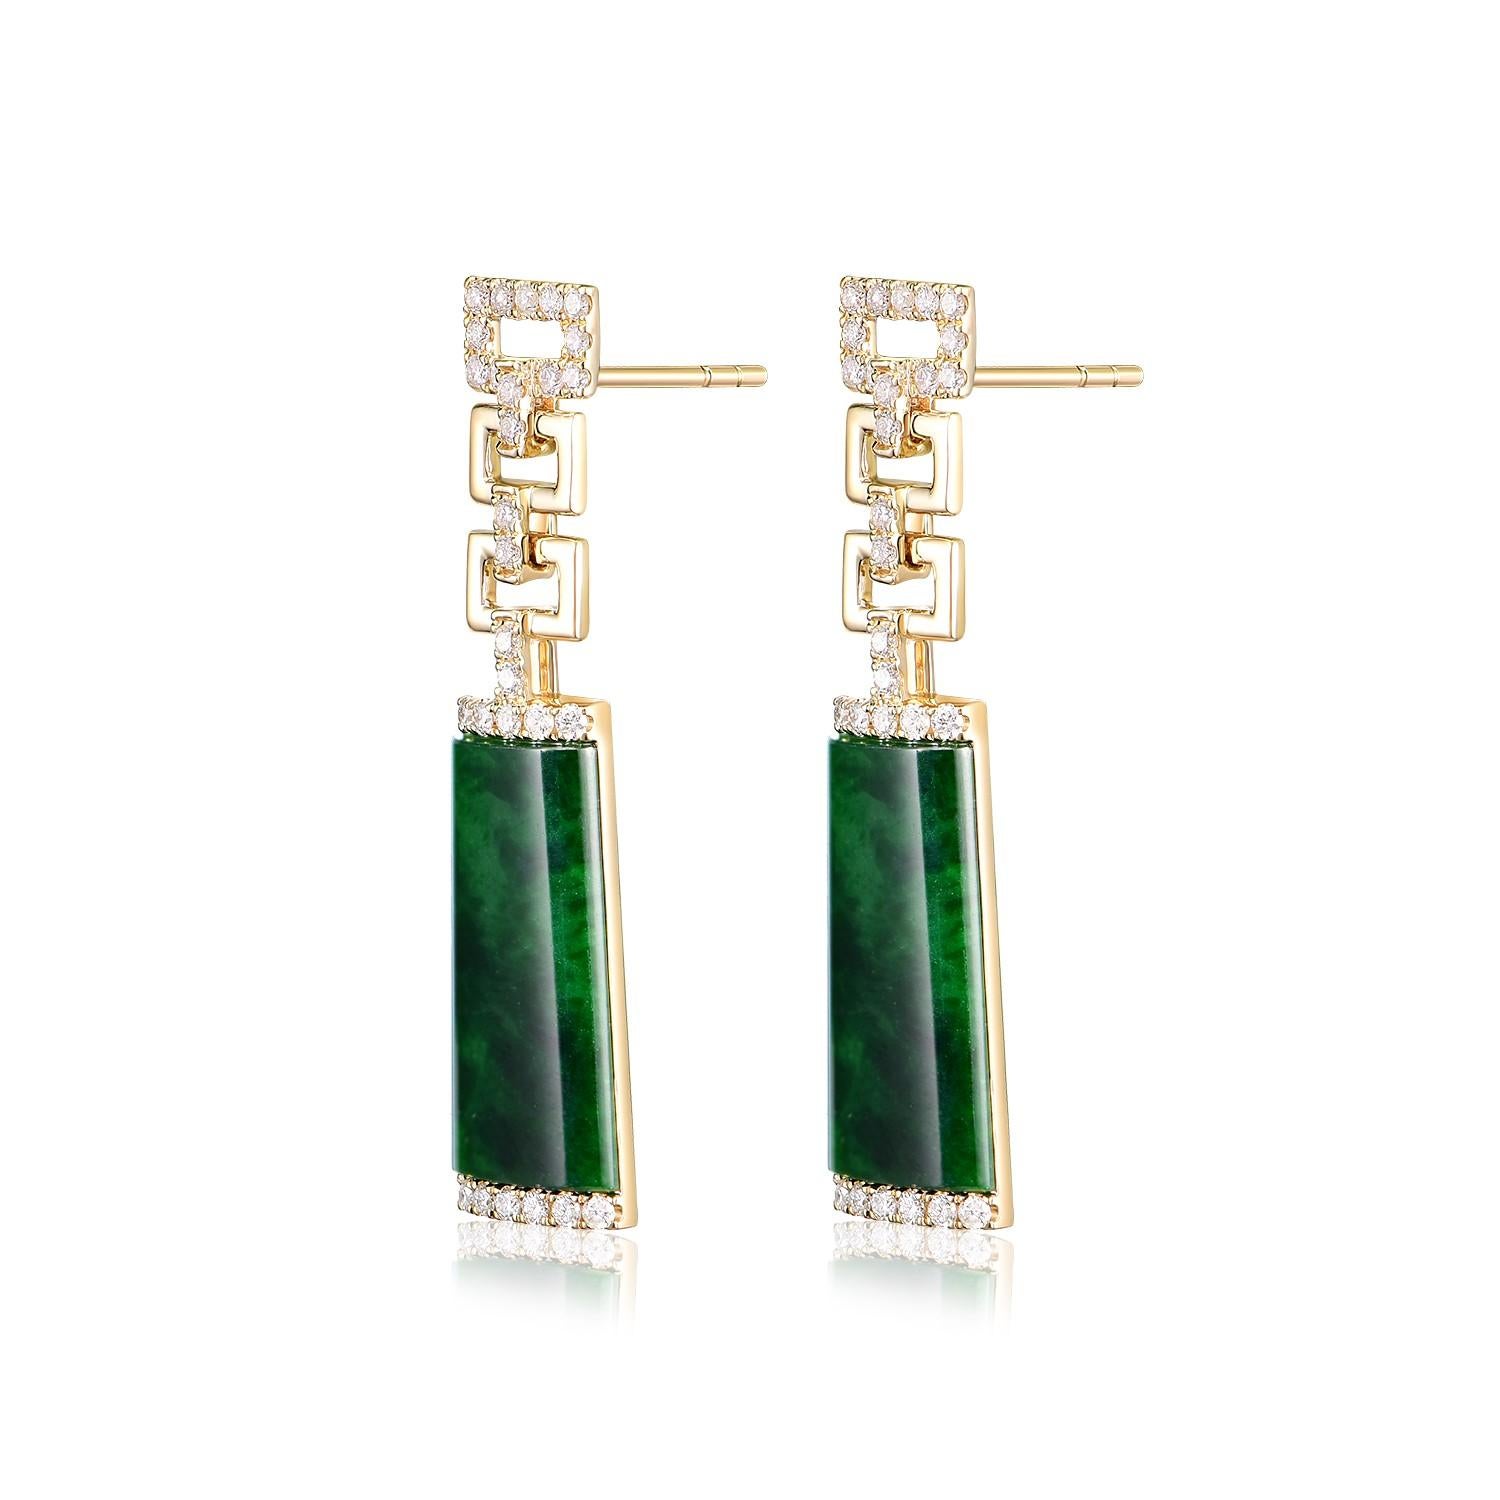 These elegant drop earrings are a true vintage treasure, featuring luscious 4.50-carat jade stones as the centerpiece. The jade boasts a deep, rich green hue, embodying the serenity and grace of this revered gemstone, and is beautifully complemented